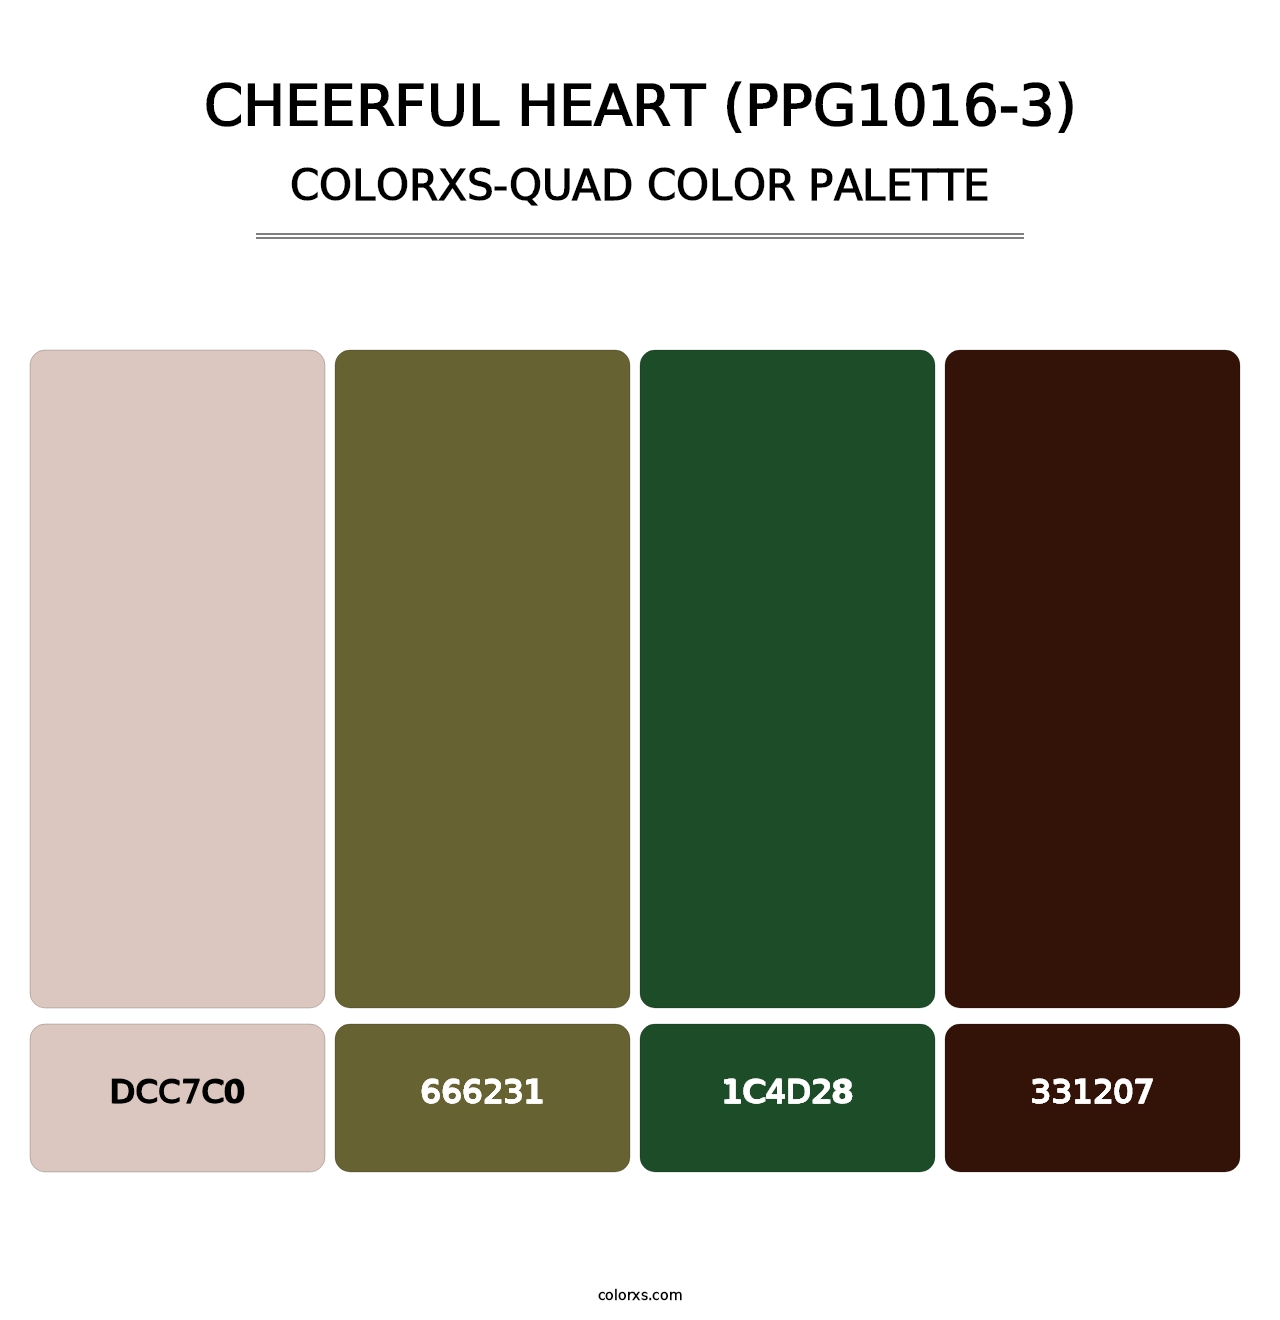 Cheerful Heart (PPG1016-3) - Colorxs Quad Palette